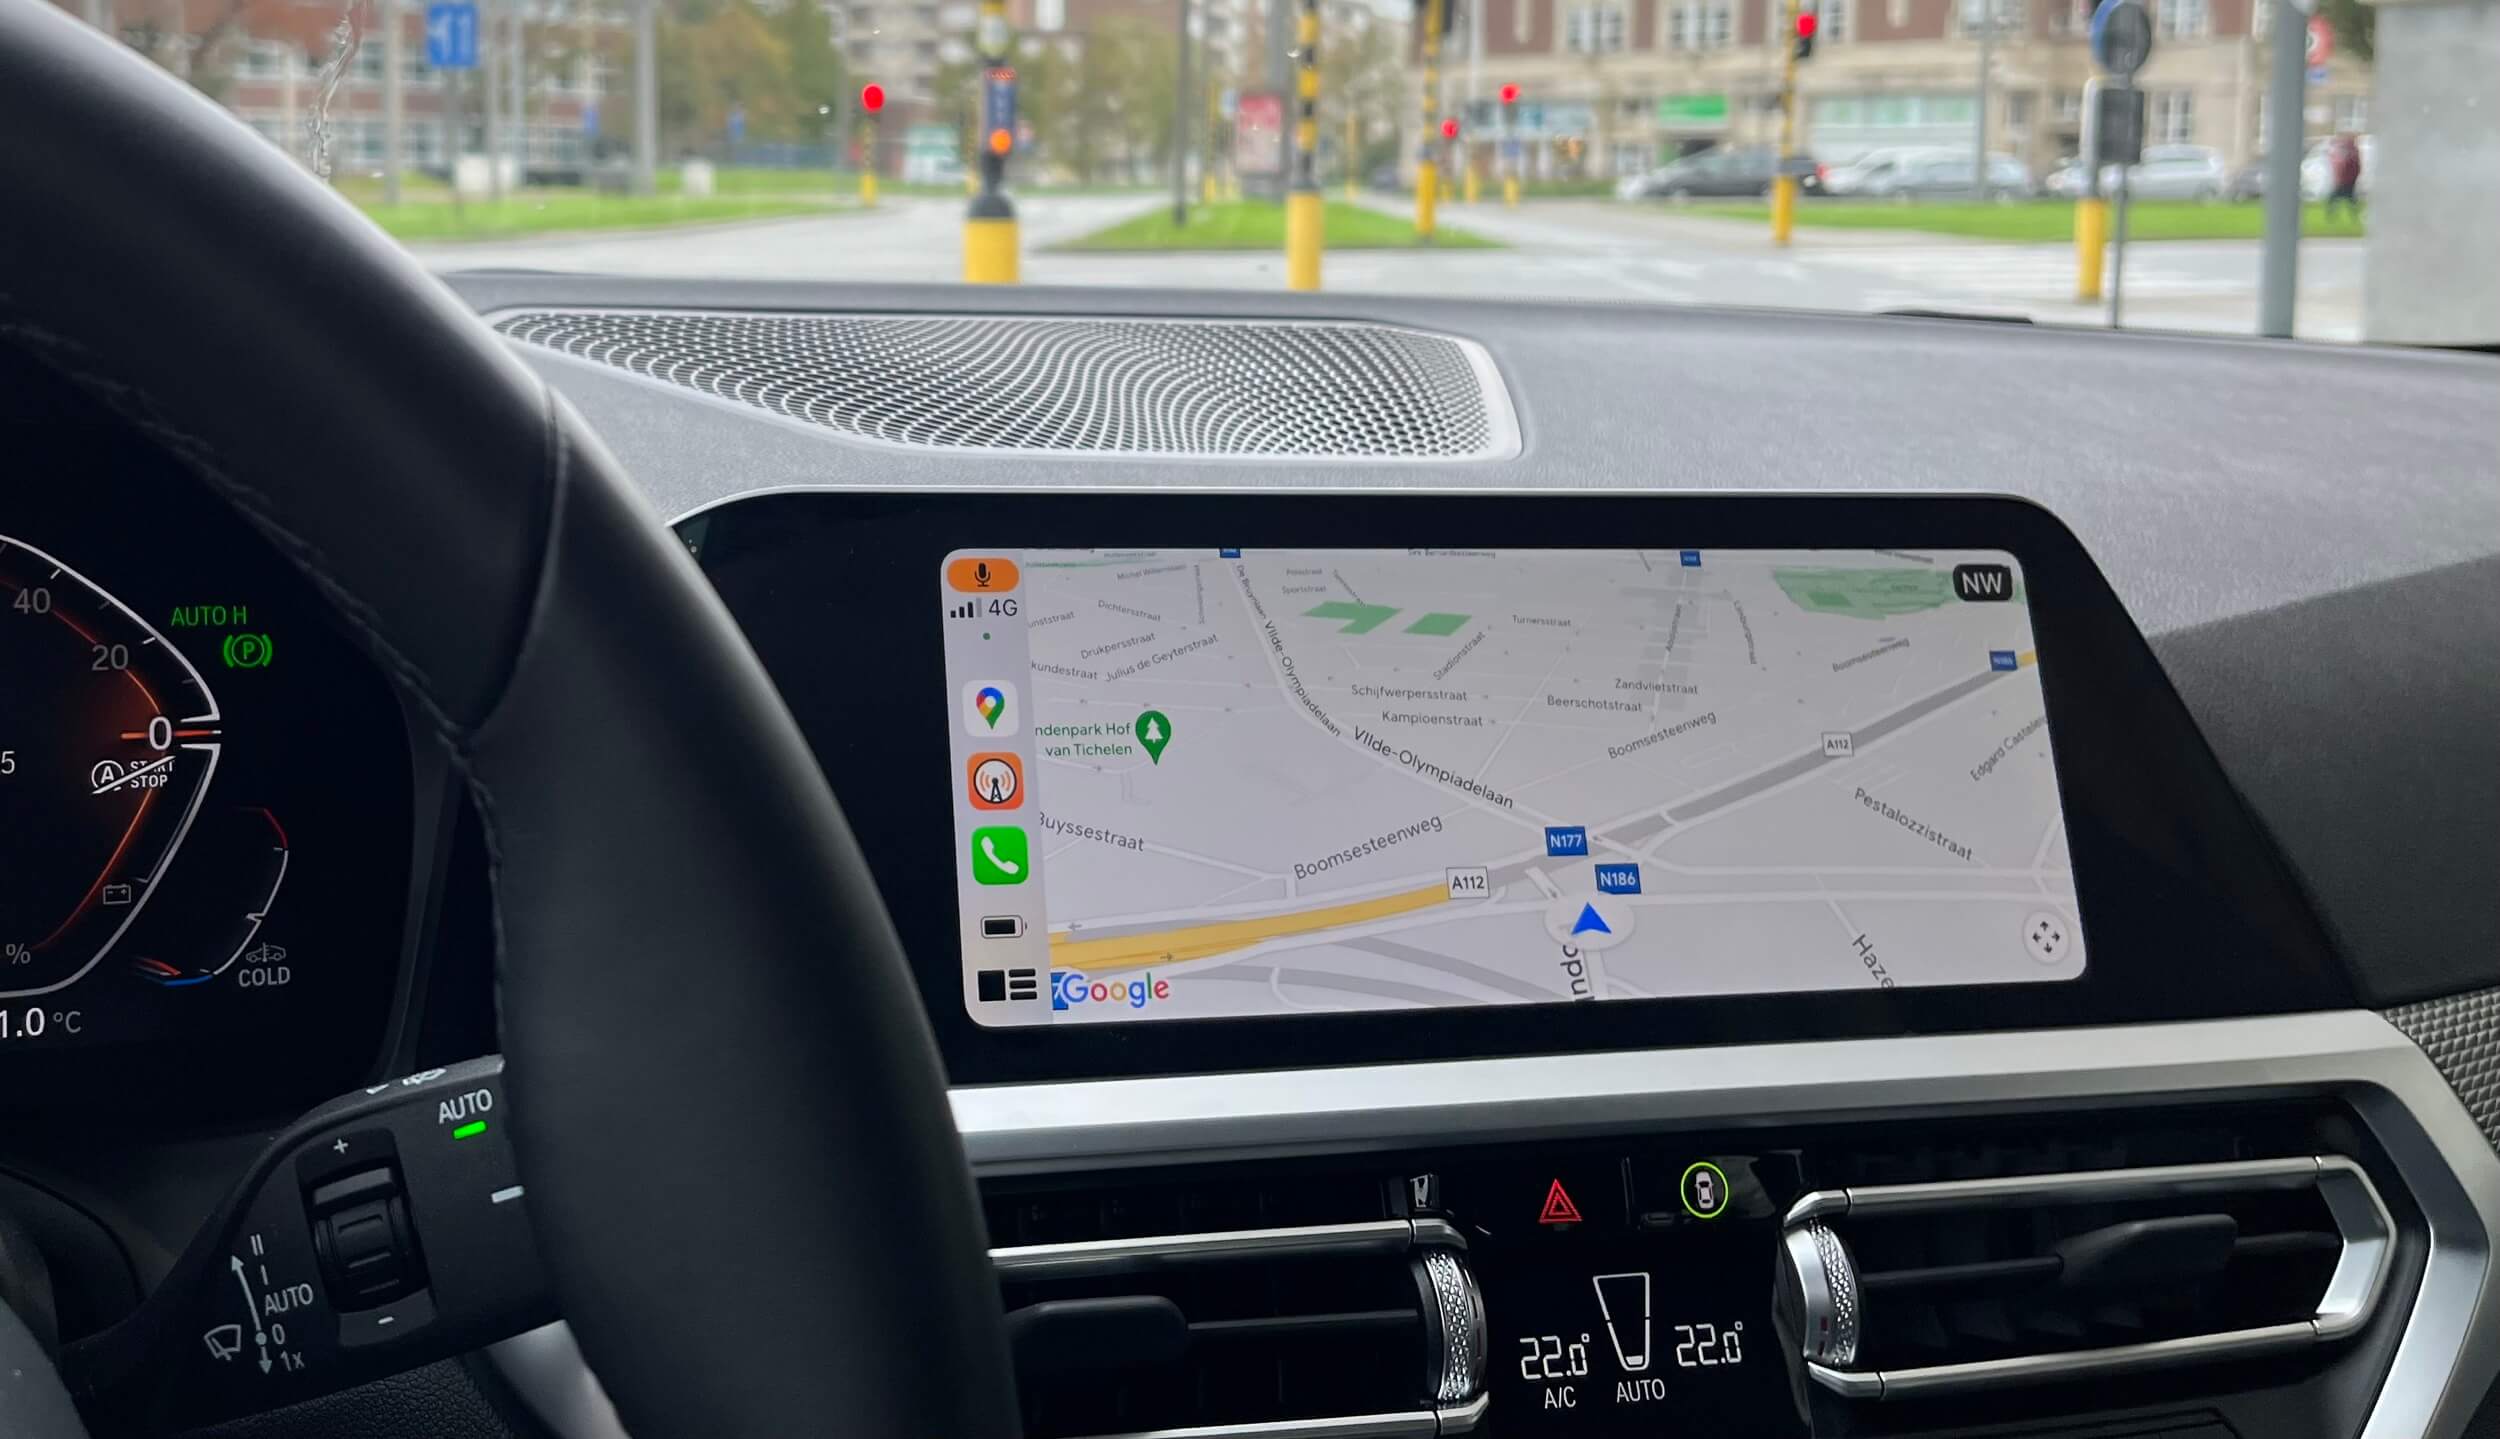 CarPlay is why auto makers should just give up on infotainment systems